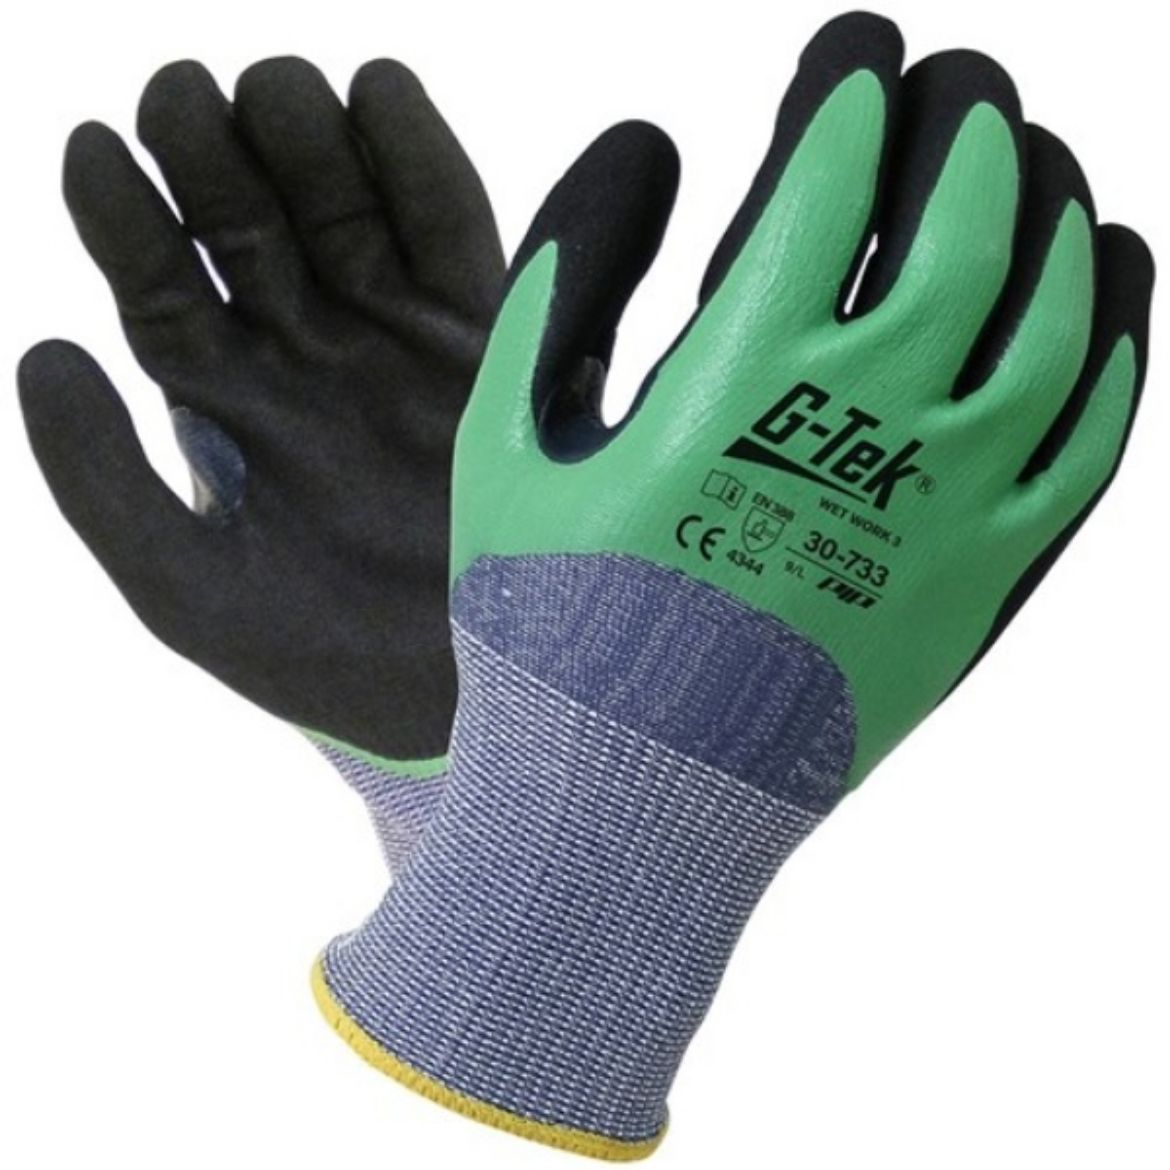 Picture of G-TEK (GUARDTEK) WET WORK CUT 3 GLOVES. AVAILABLE IN SIZES 7 TO 11.